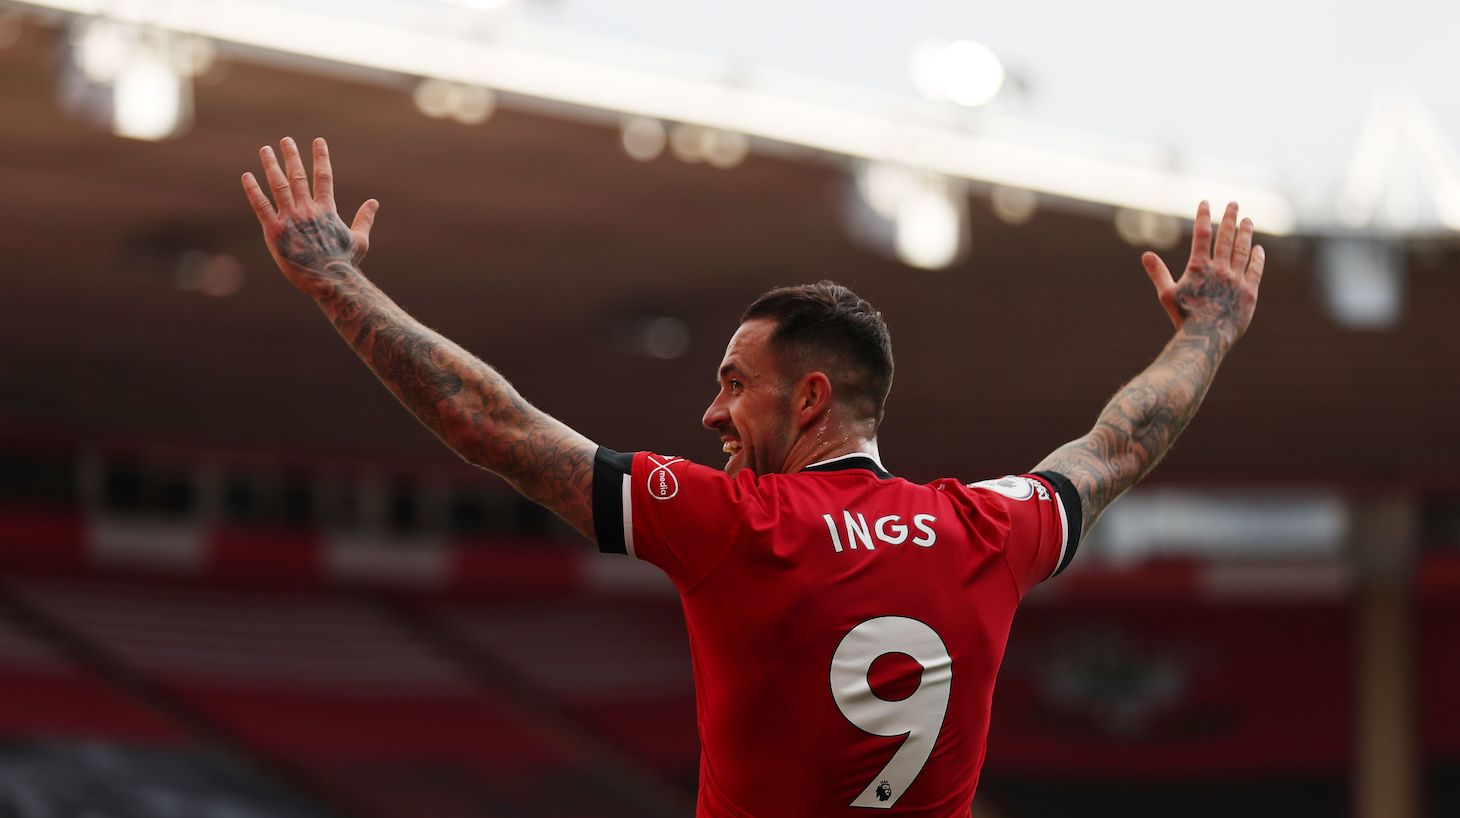 Southampton's English striker Danny Ings celebrates his team's second goal during the English Premier League football match between Southampton and Everton at St Mary's Stadium in Southampton, southern England, on October 25, 2020.